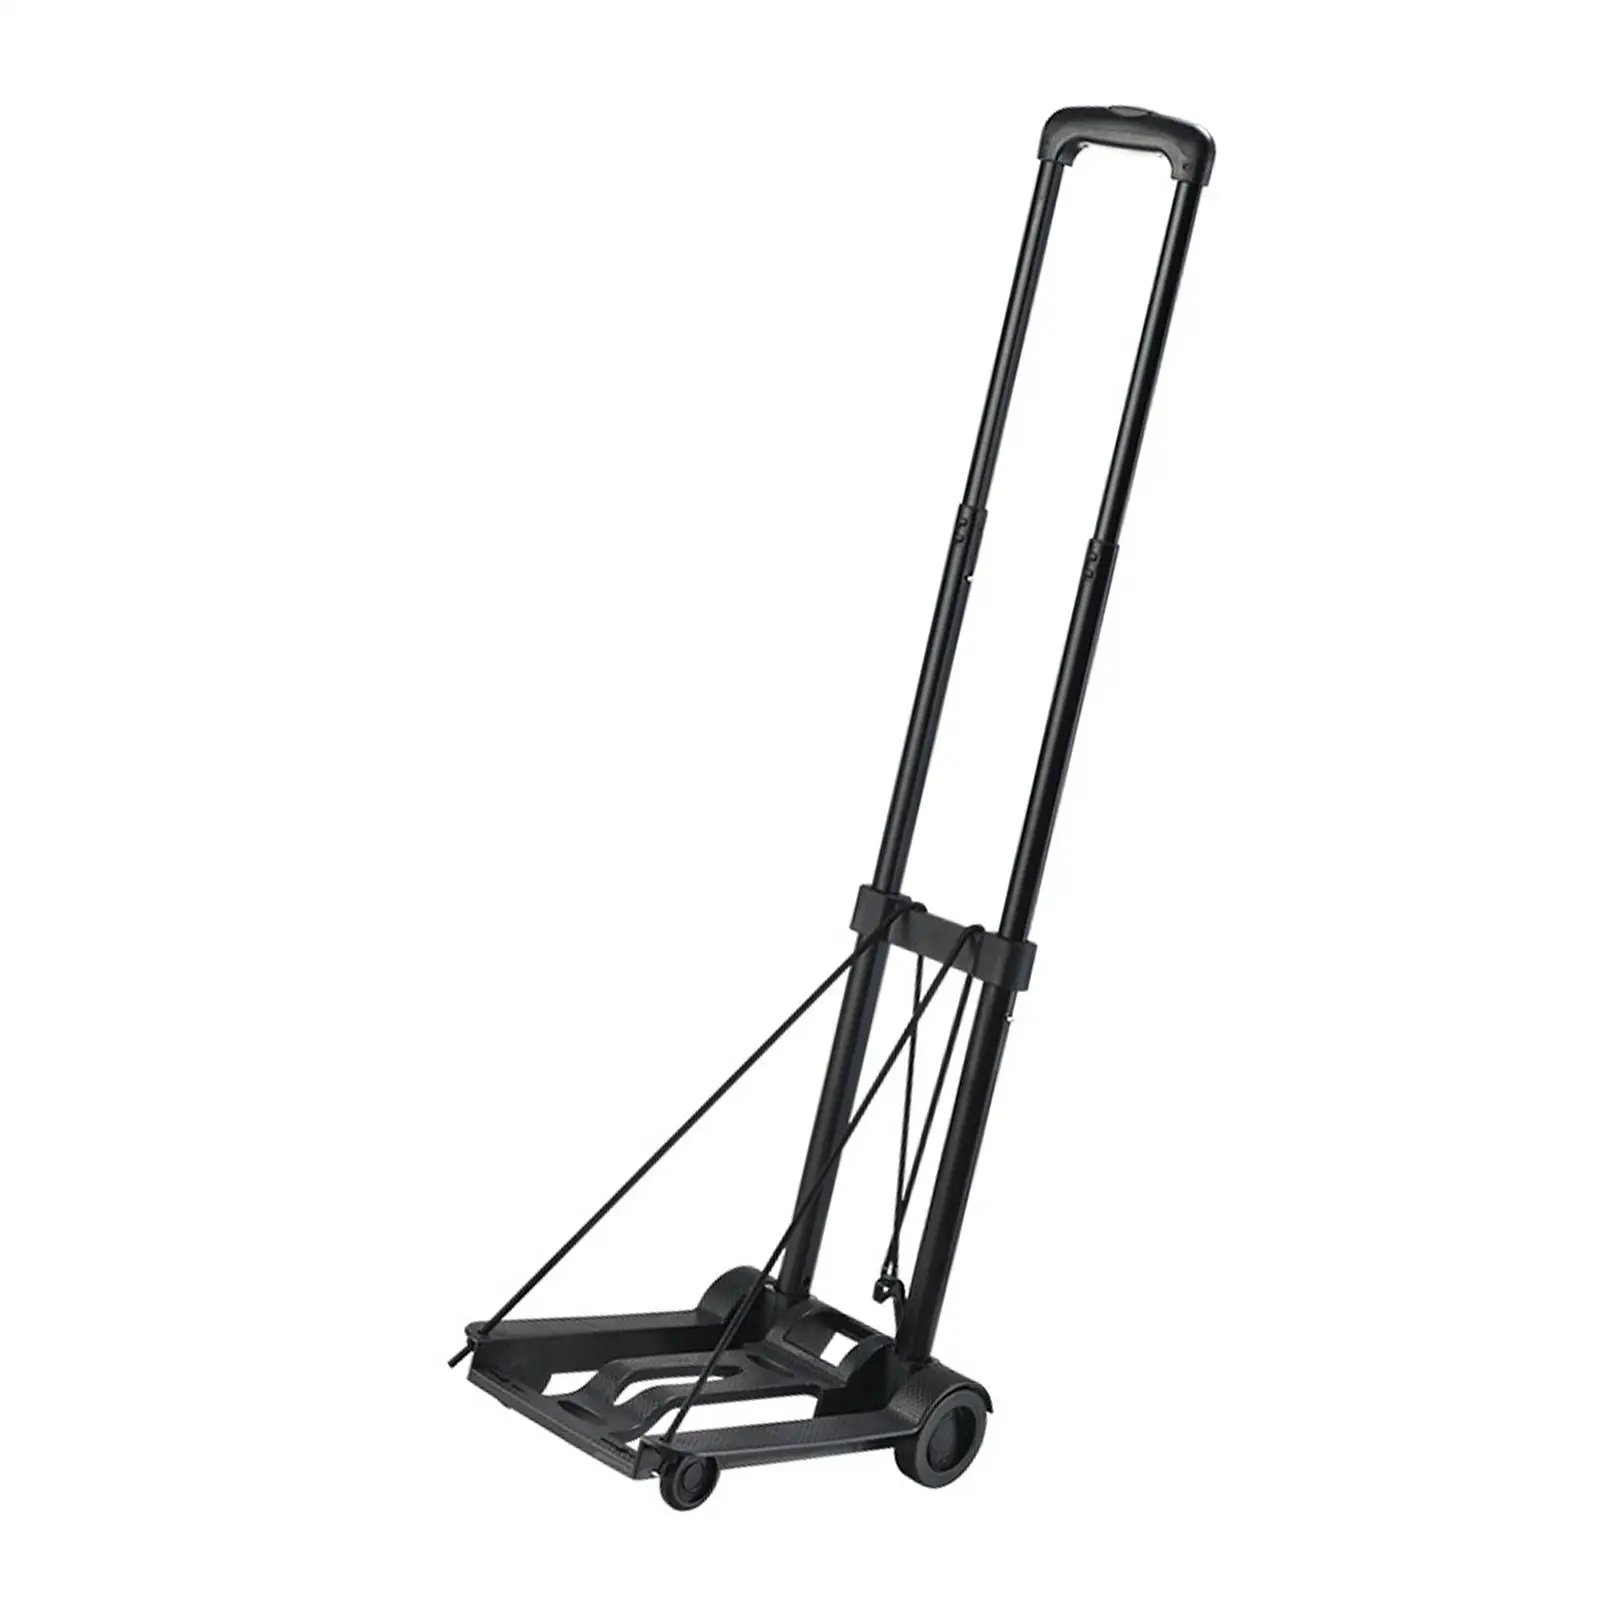 Multi Purpose Folding Hand Truck Heavy Duty Adjustable Handle Luggage Trolley Cart for Moving Transportation Travel Carrying